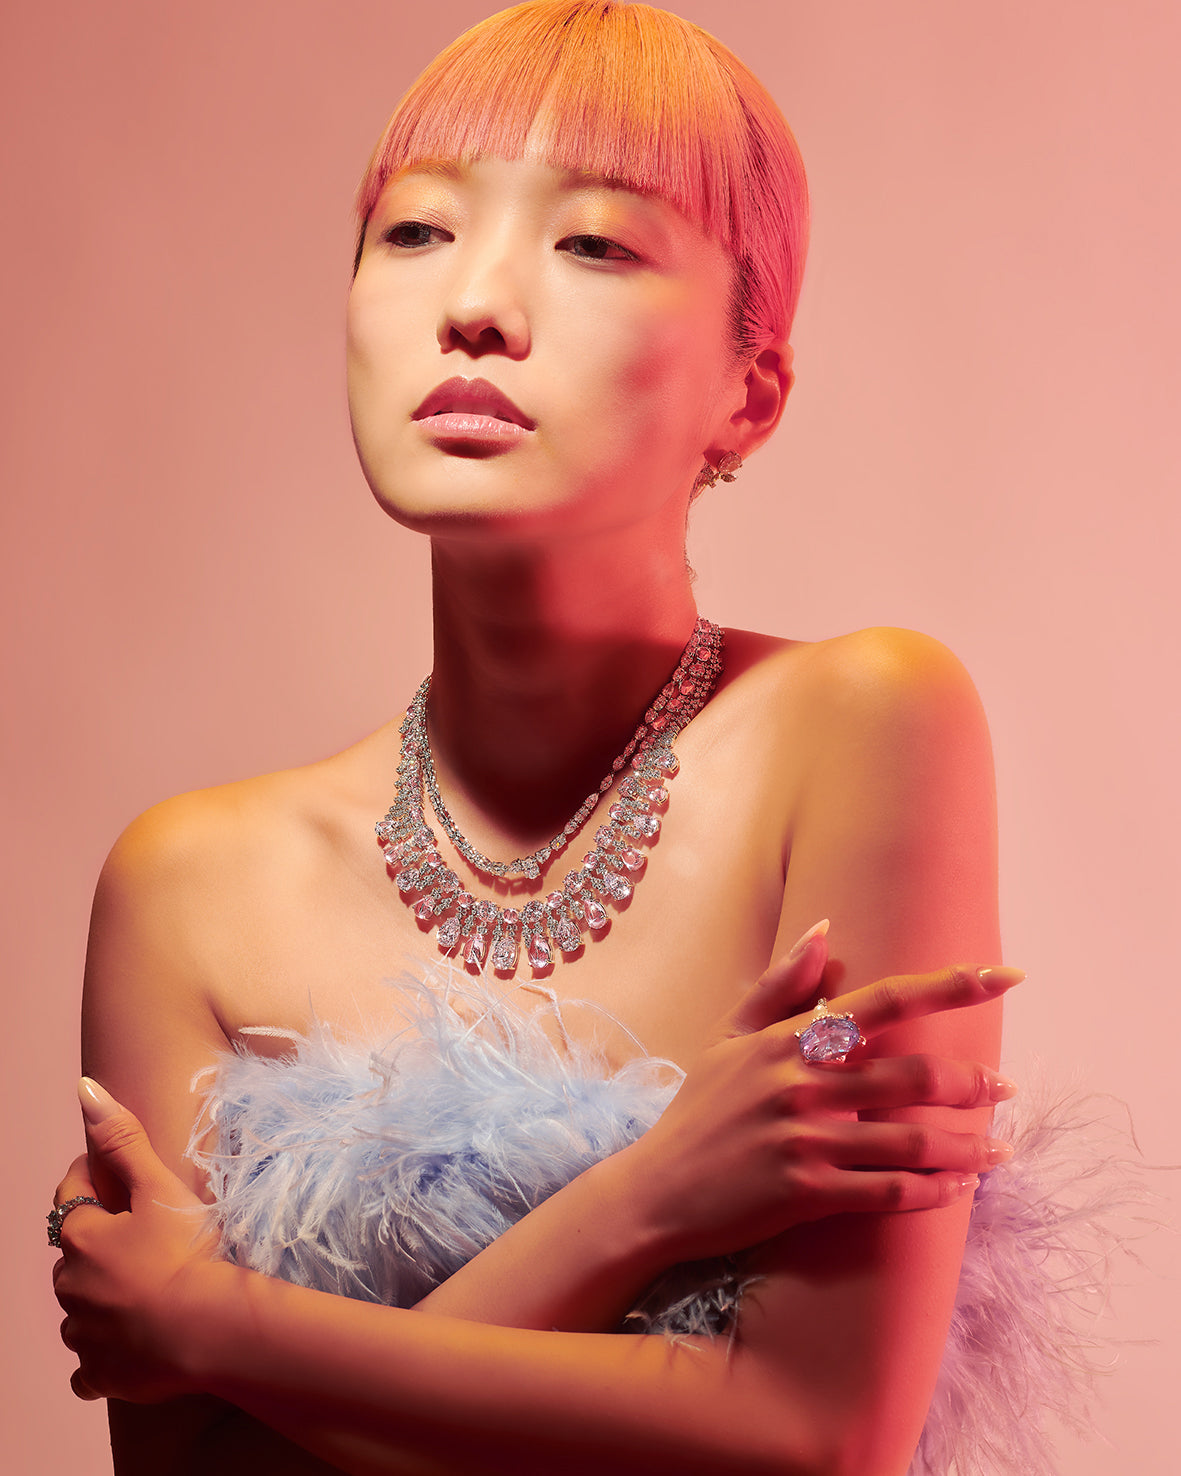 Anabela Chan Joaillerie_Blush Tutti Frutti Necklace, Rose Blue Tulip Earrings, Dimaond Spectra Necklace, Pale Rose Mermaid Ring, Baby Blue Nova Starburst Ring_Model Campaign Image